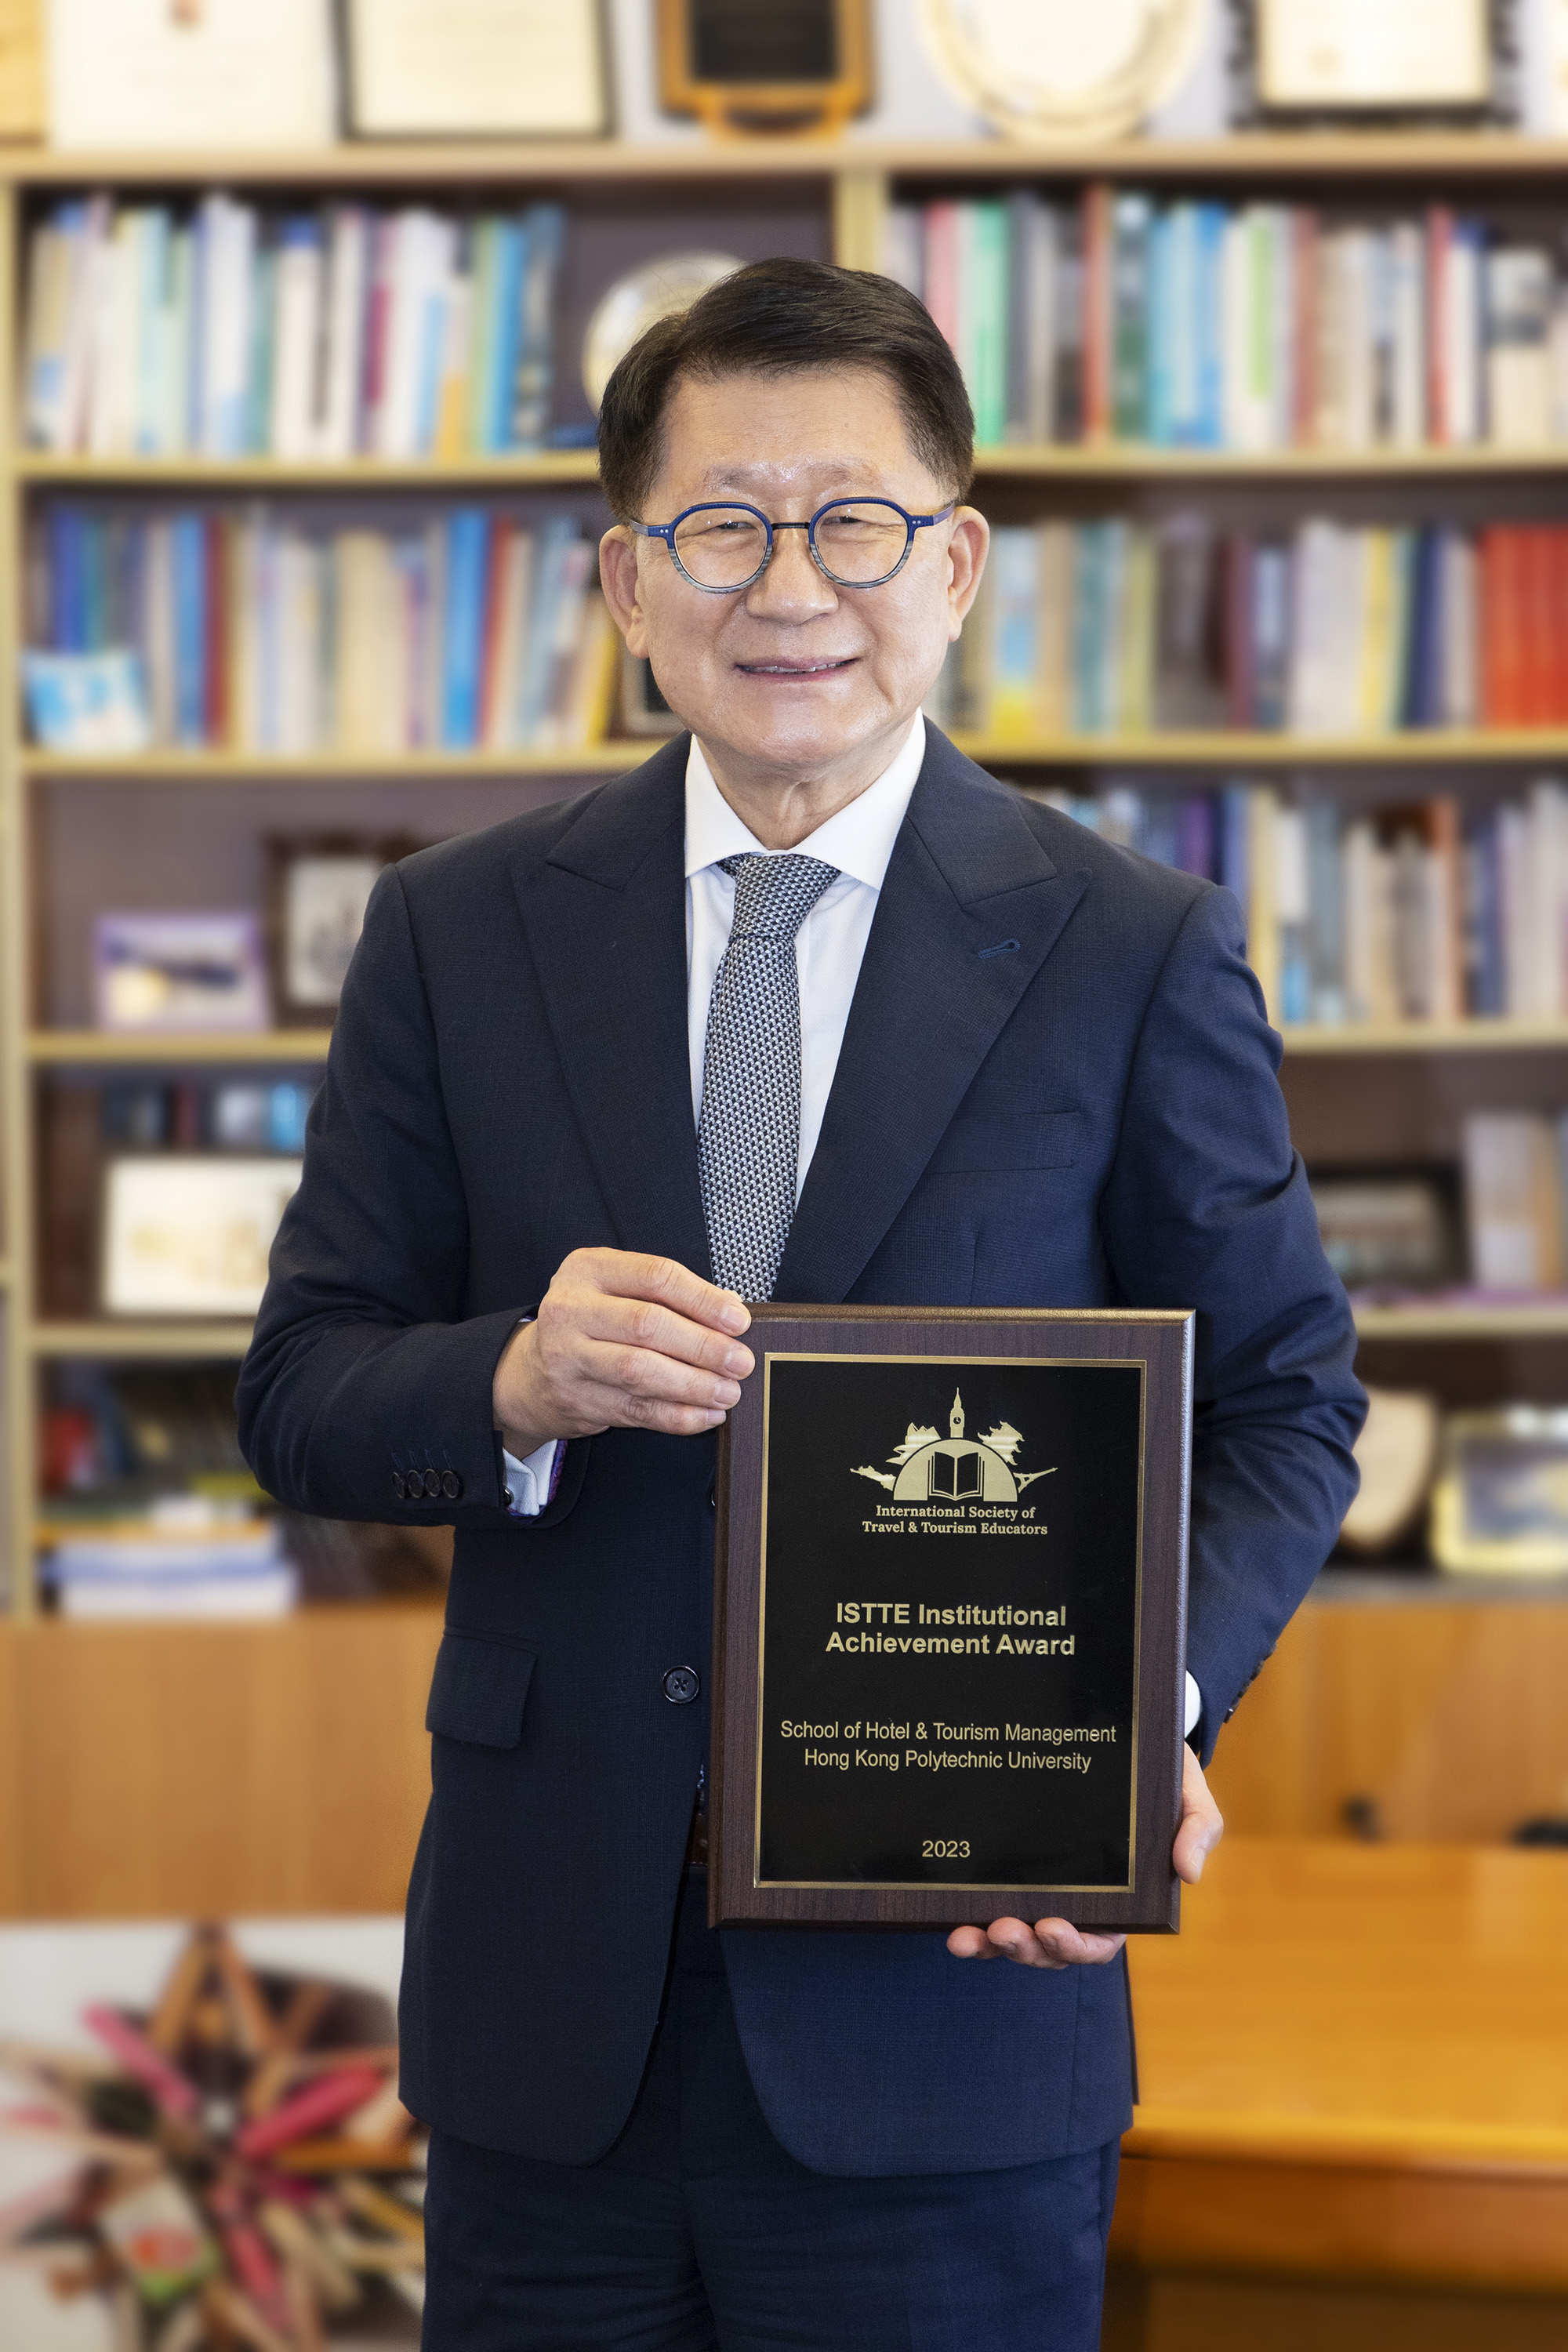 SHTM Dean Kaye Chon with the 2023 ISTTE Institutional Achievement Award

— Source: Hong Kong Poly